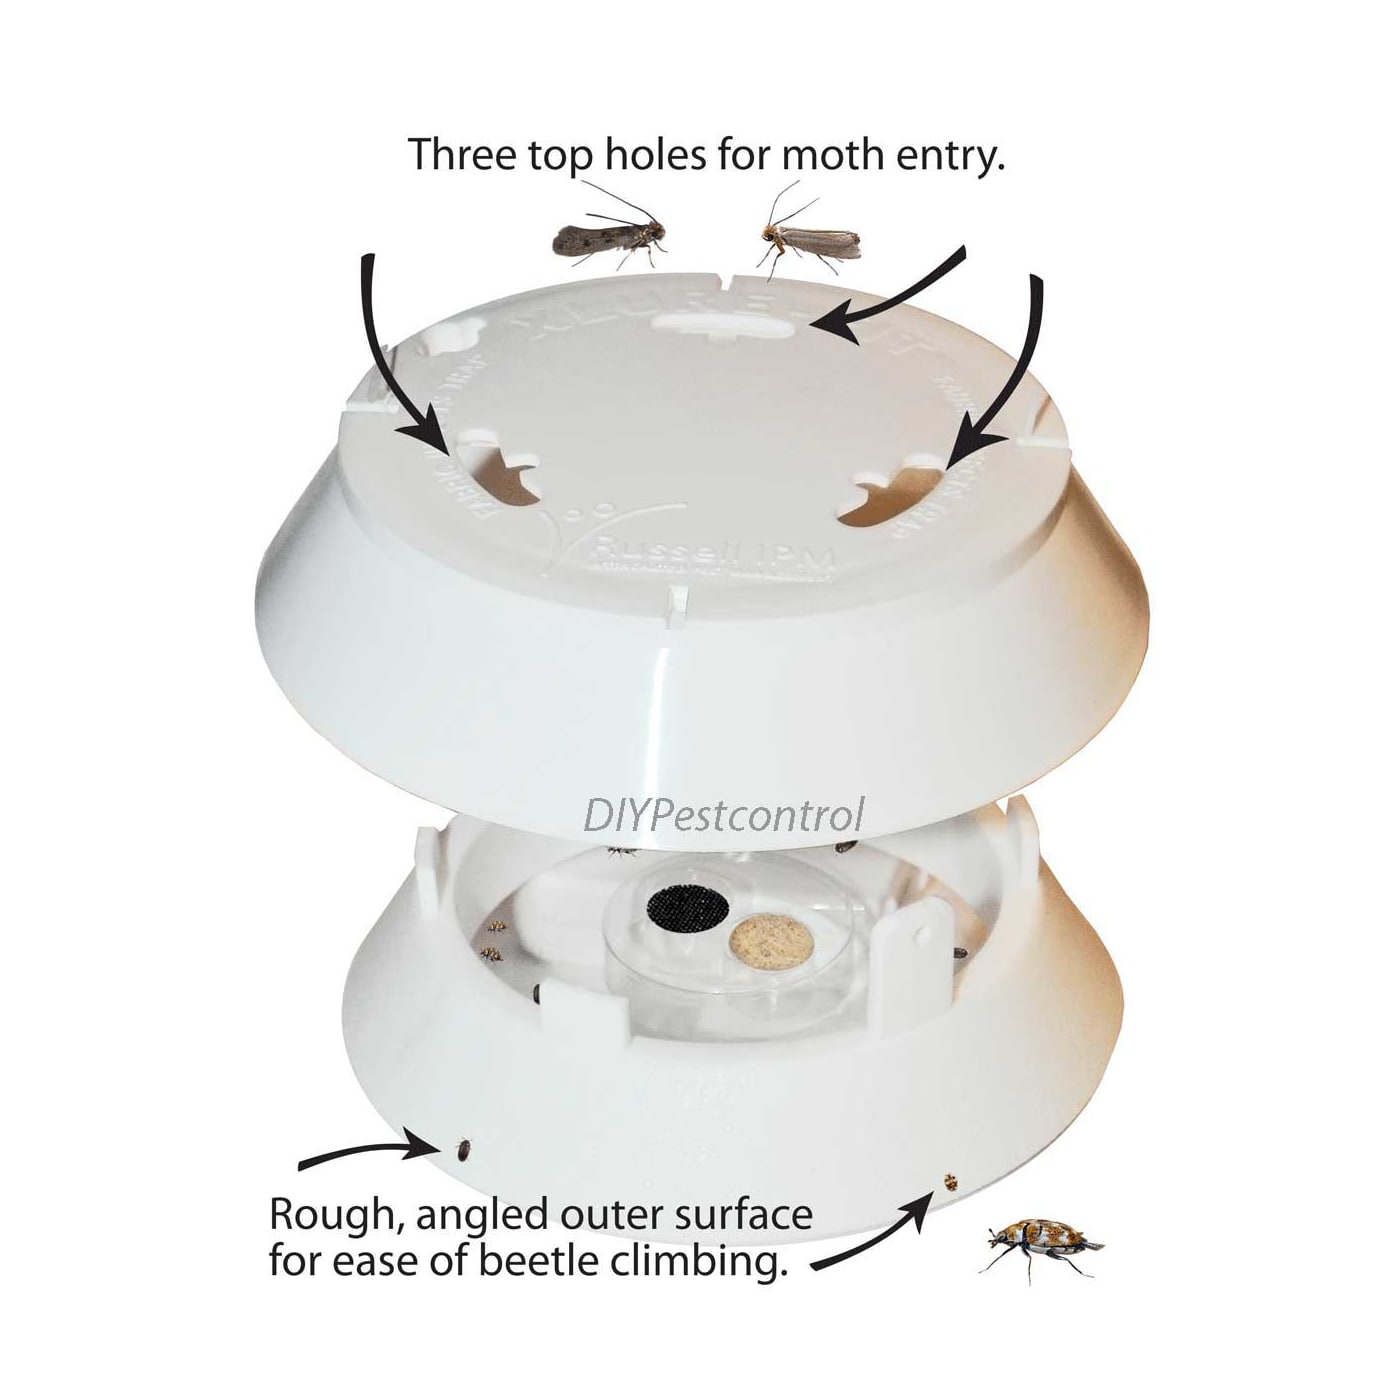 DIY Pest Control Insect/Monitor Traps